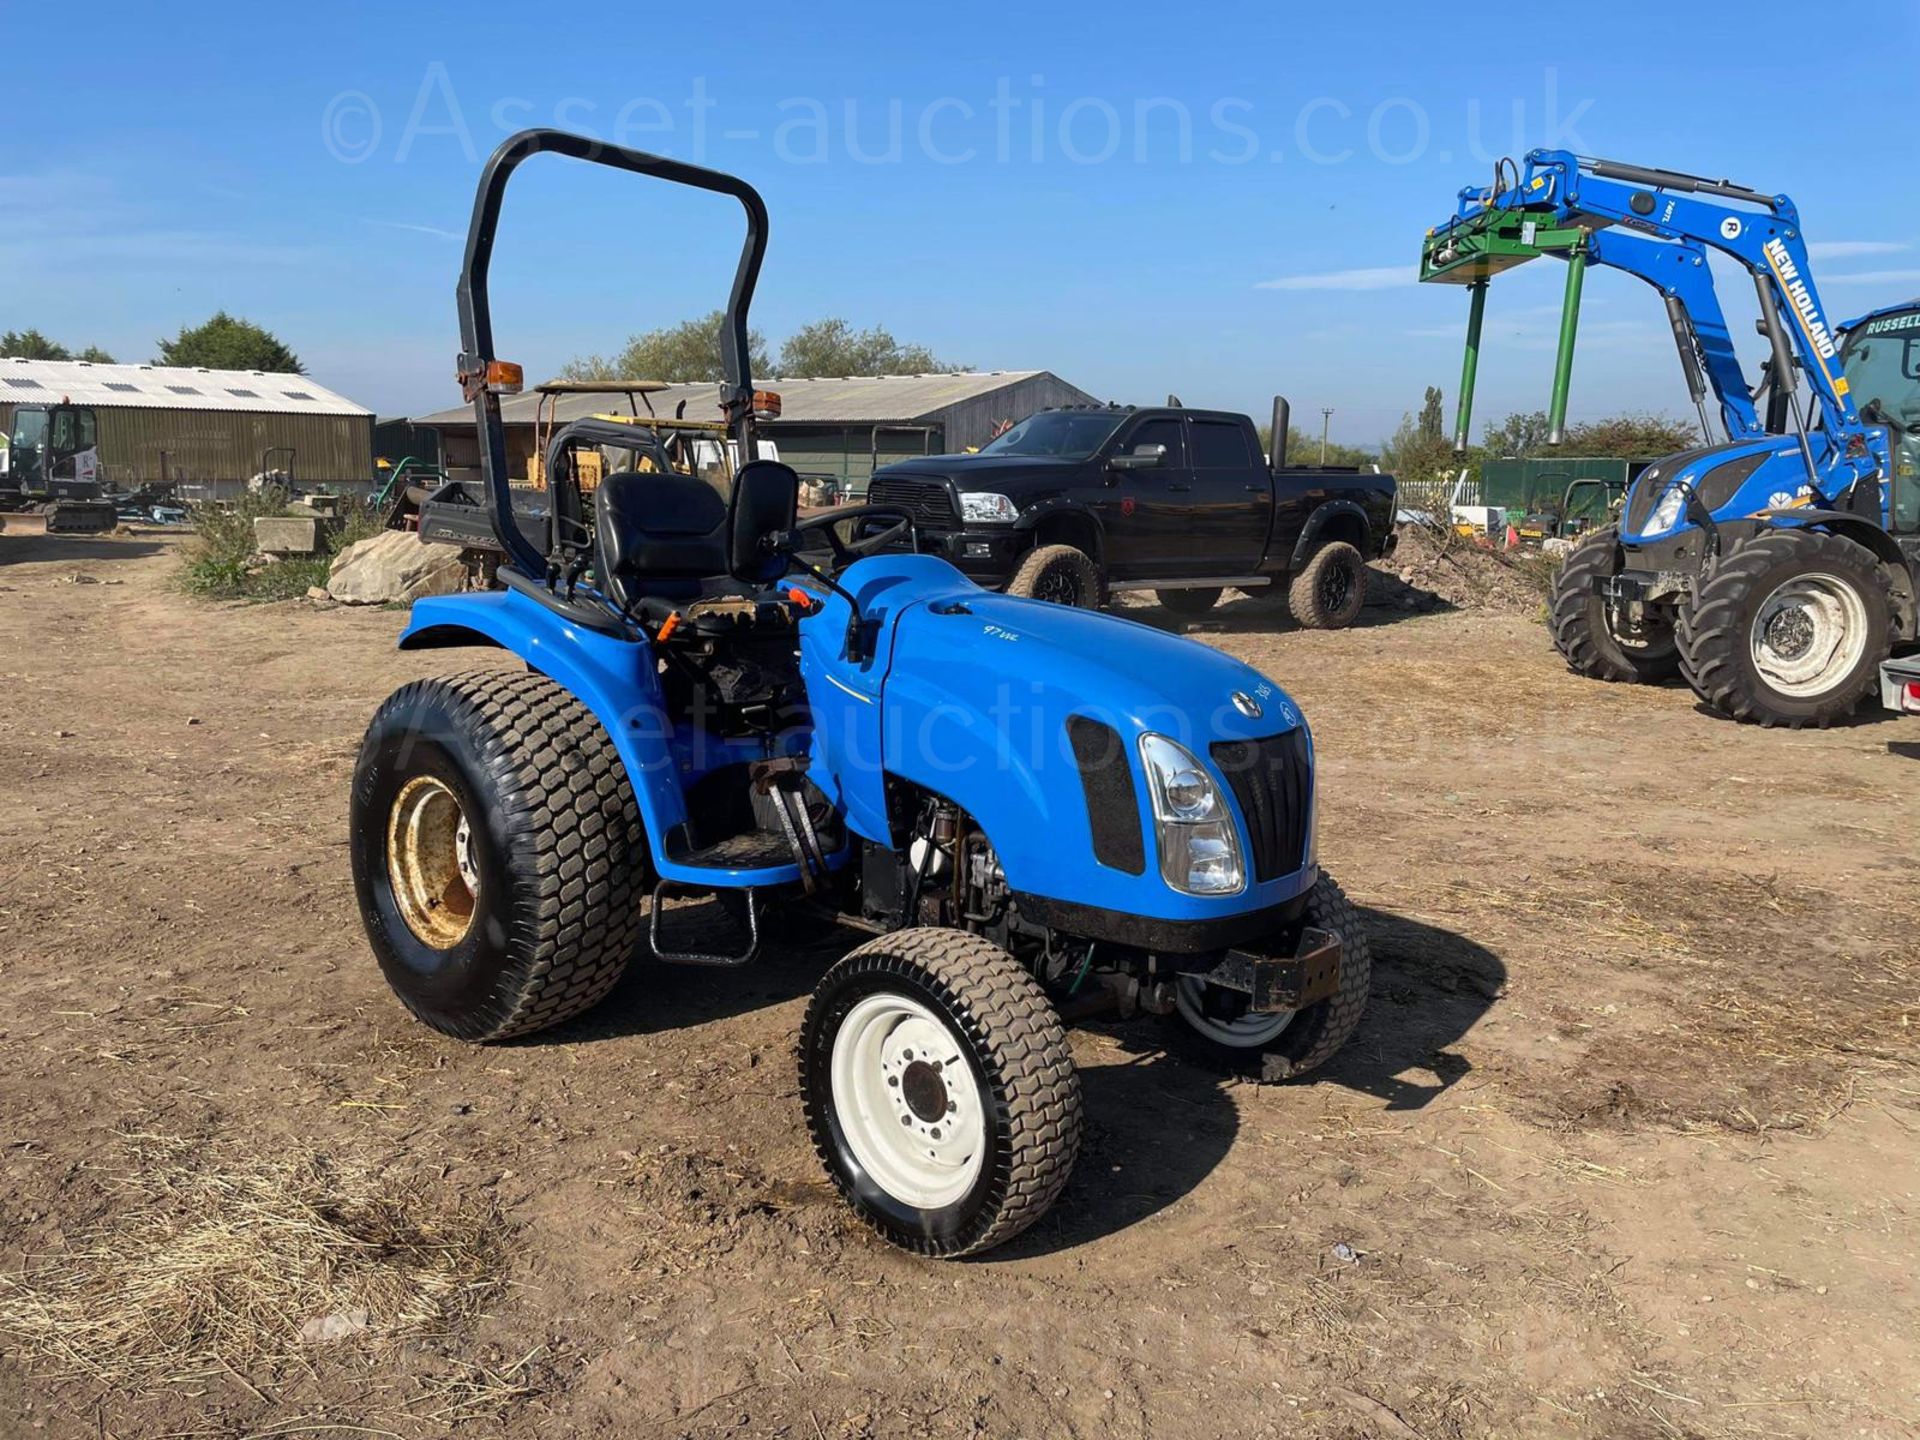 2005 NEW HOLLAND TC27DA 27hp 4WD COMPACT TRACTOR, RUNS DRIVES AND WORKS WELL, ROAD REGISTERED - Image 4 of 26